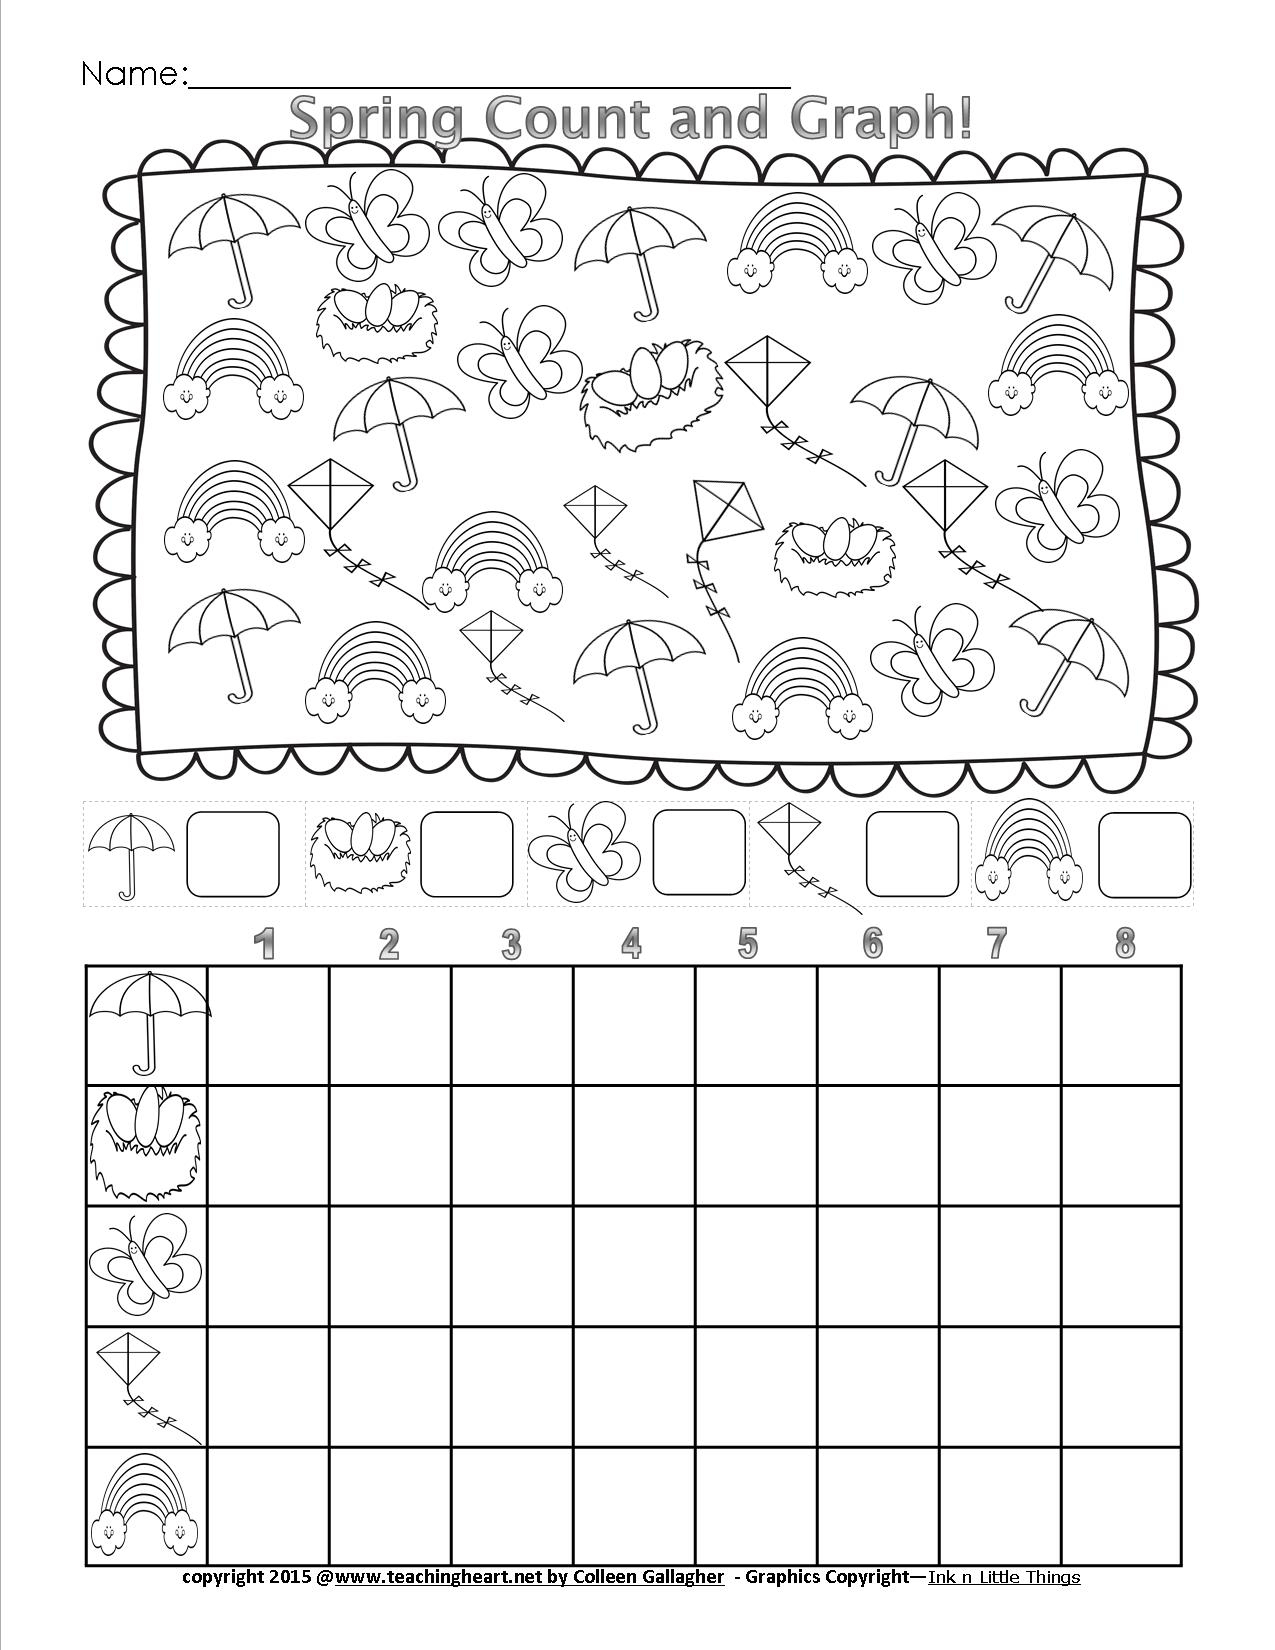 Spring Count And Graph - Free - Teaching Heart Blog Teaching Heart Blog | Free Printable Graphing Worksheets